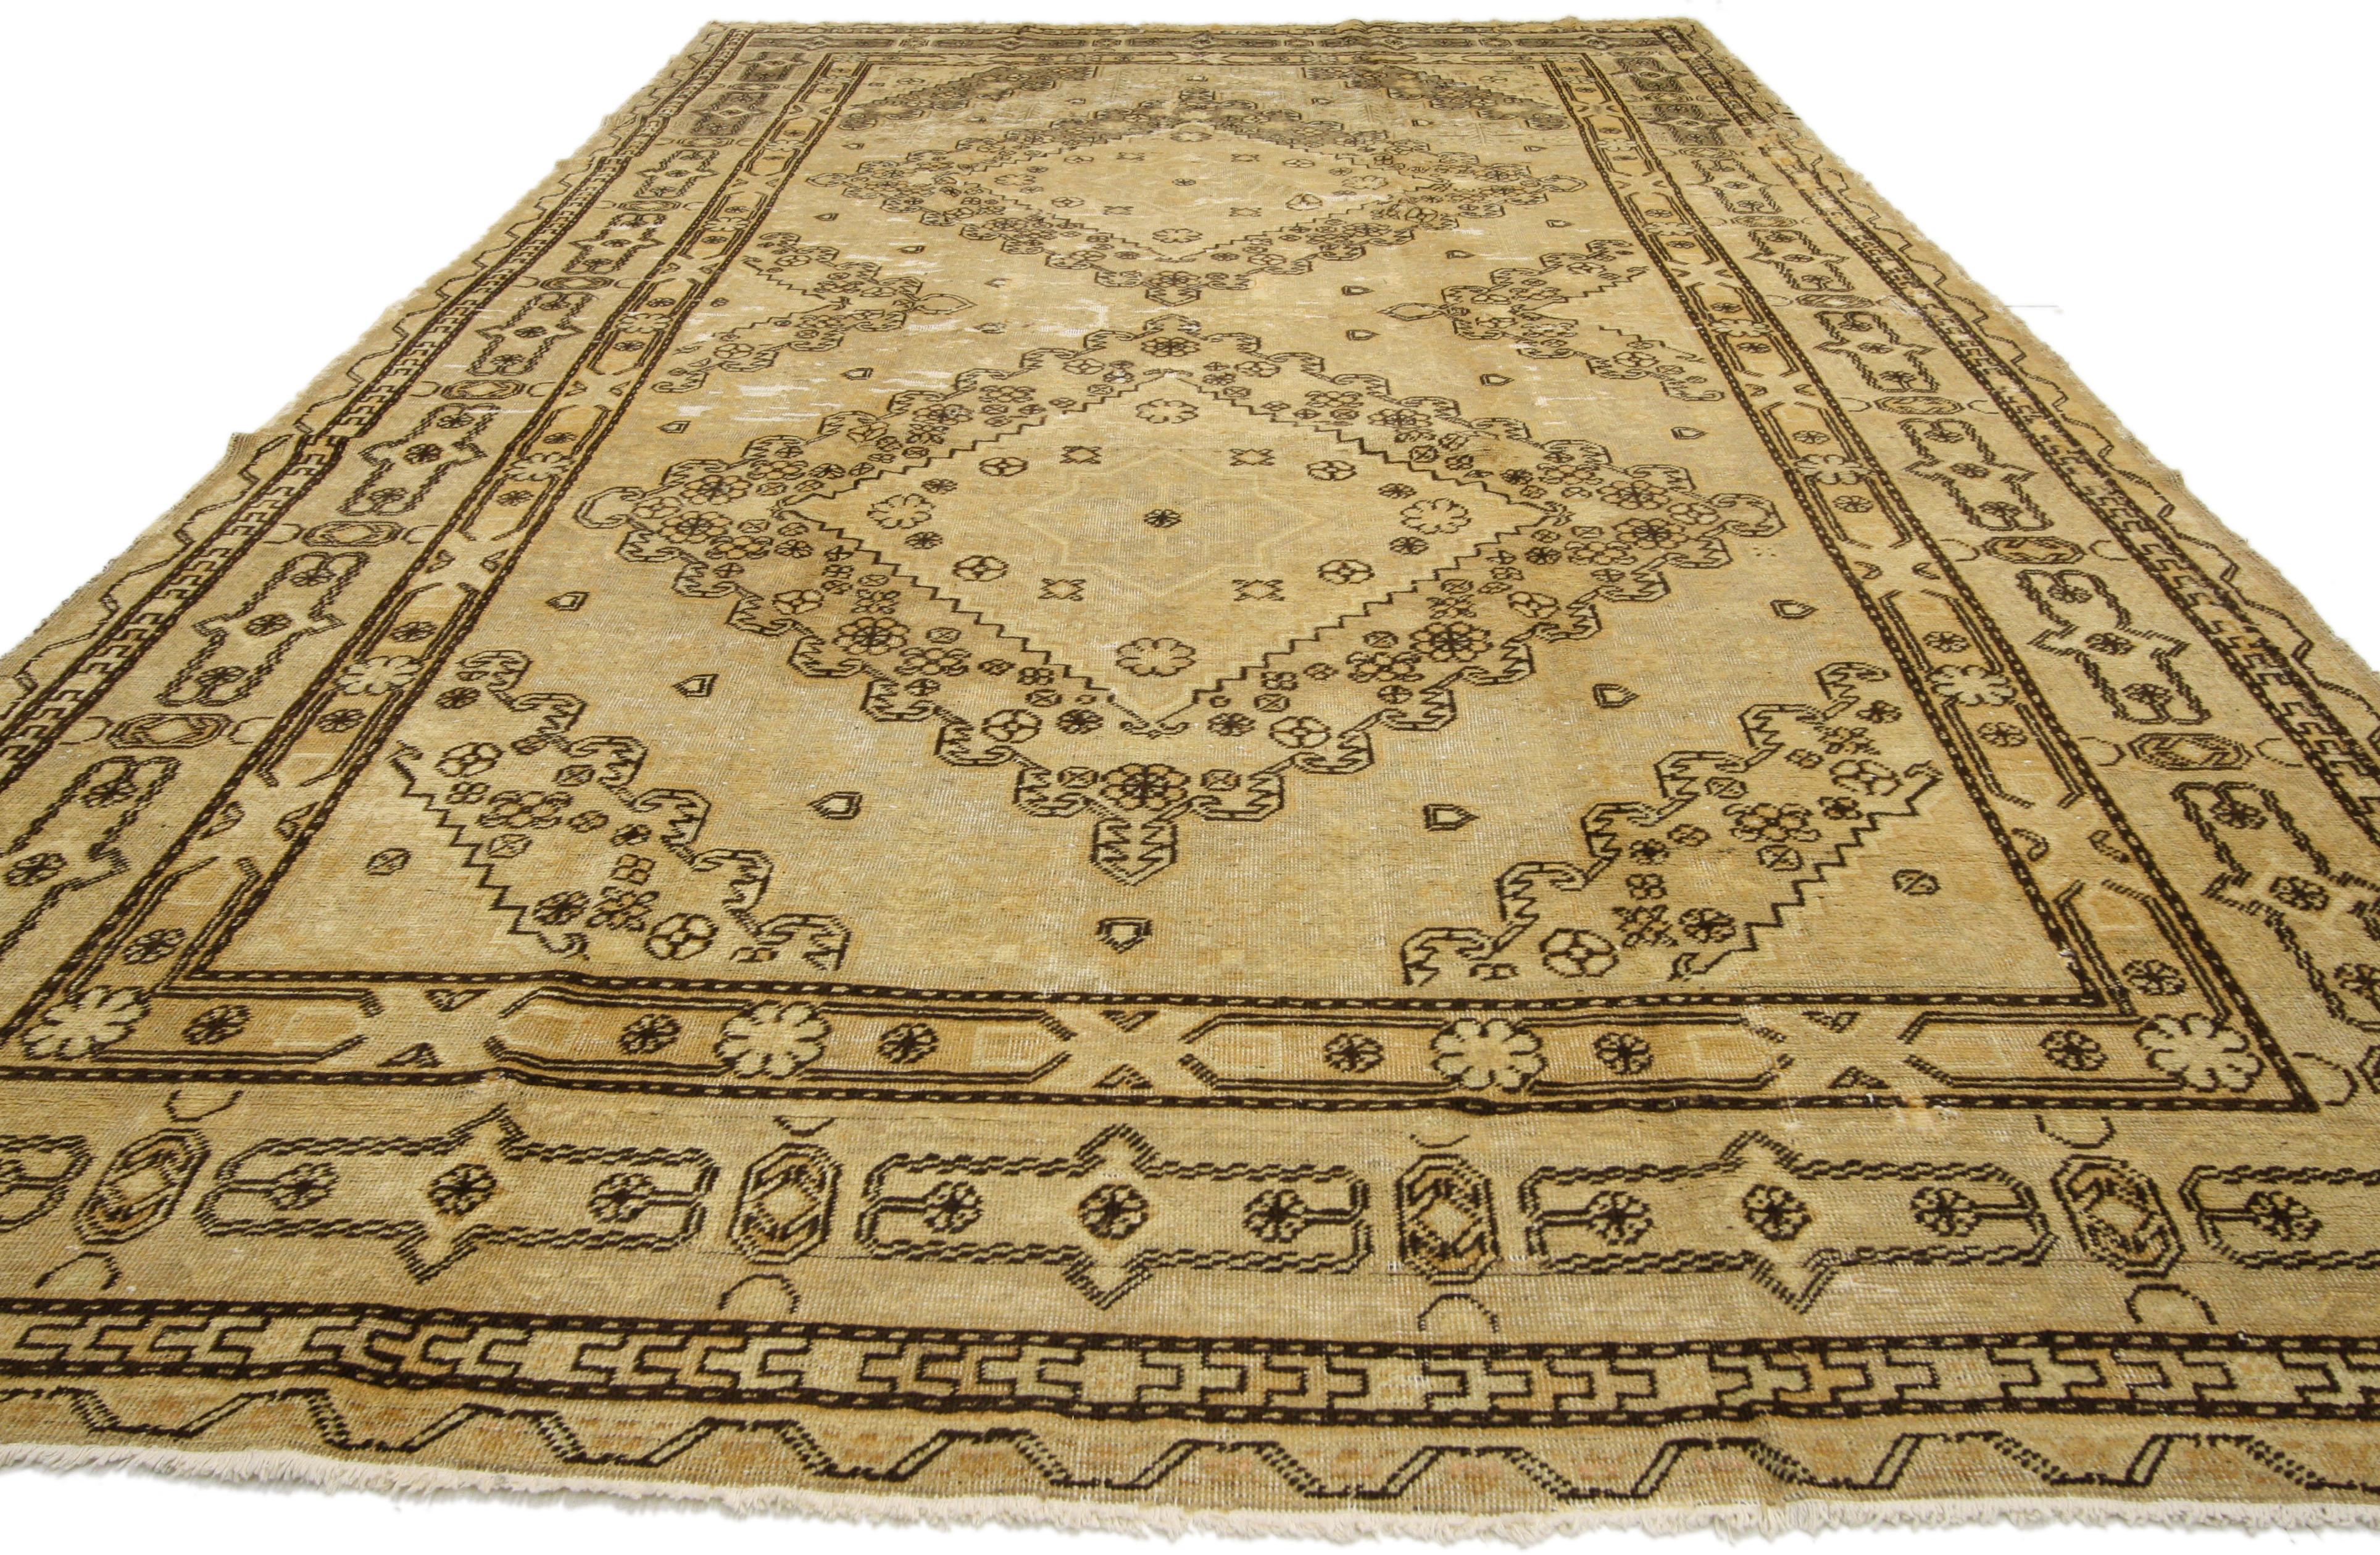 Turkmen Distressed Antique Khotan Gallery Rug with Mid-Century Modern Style For Sale